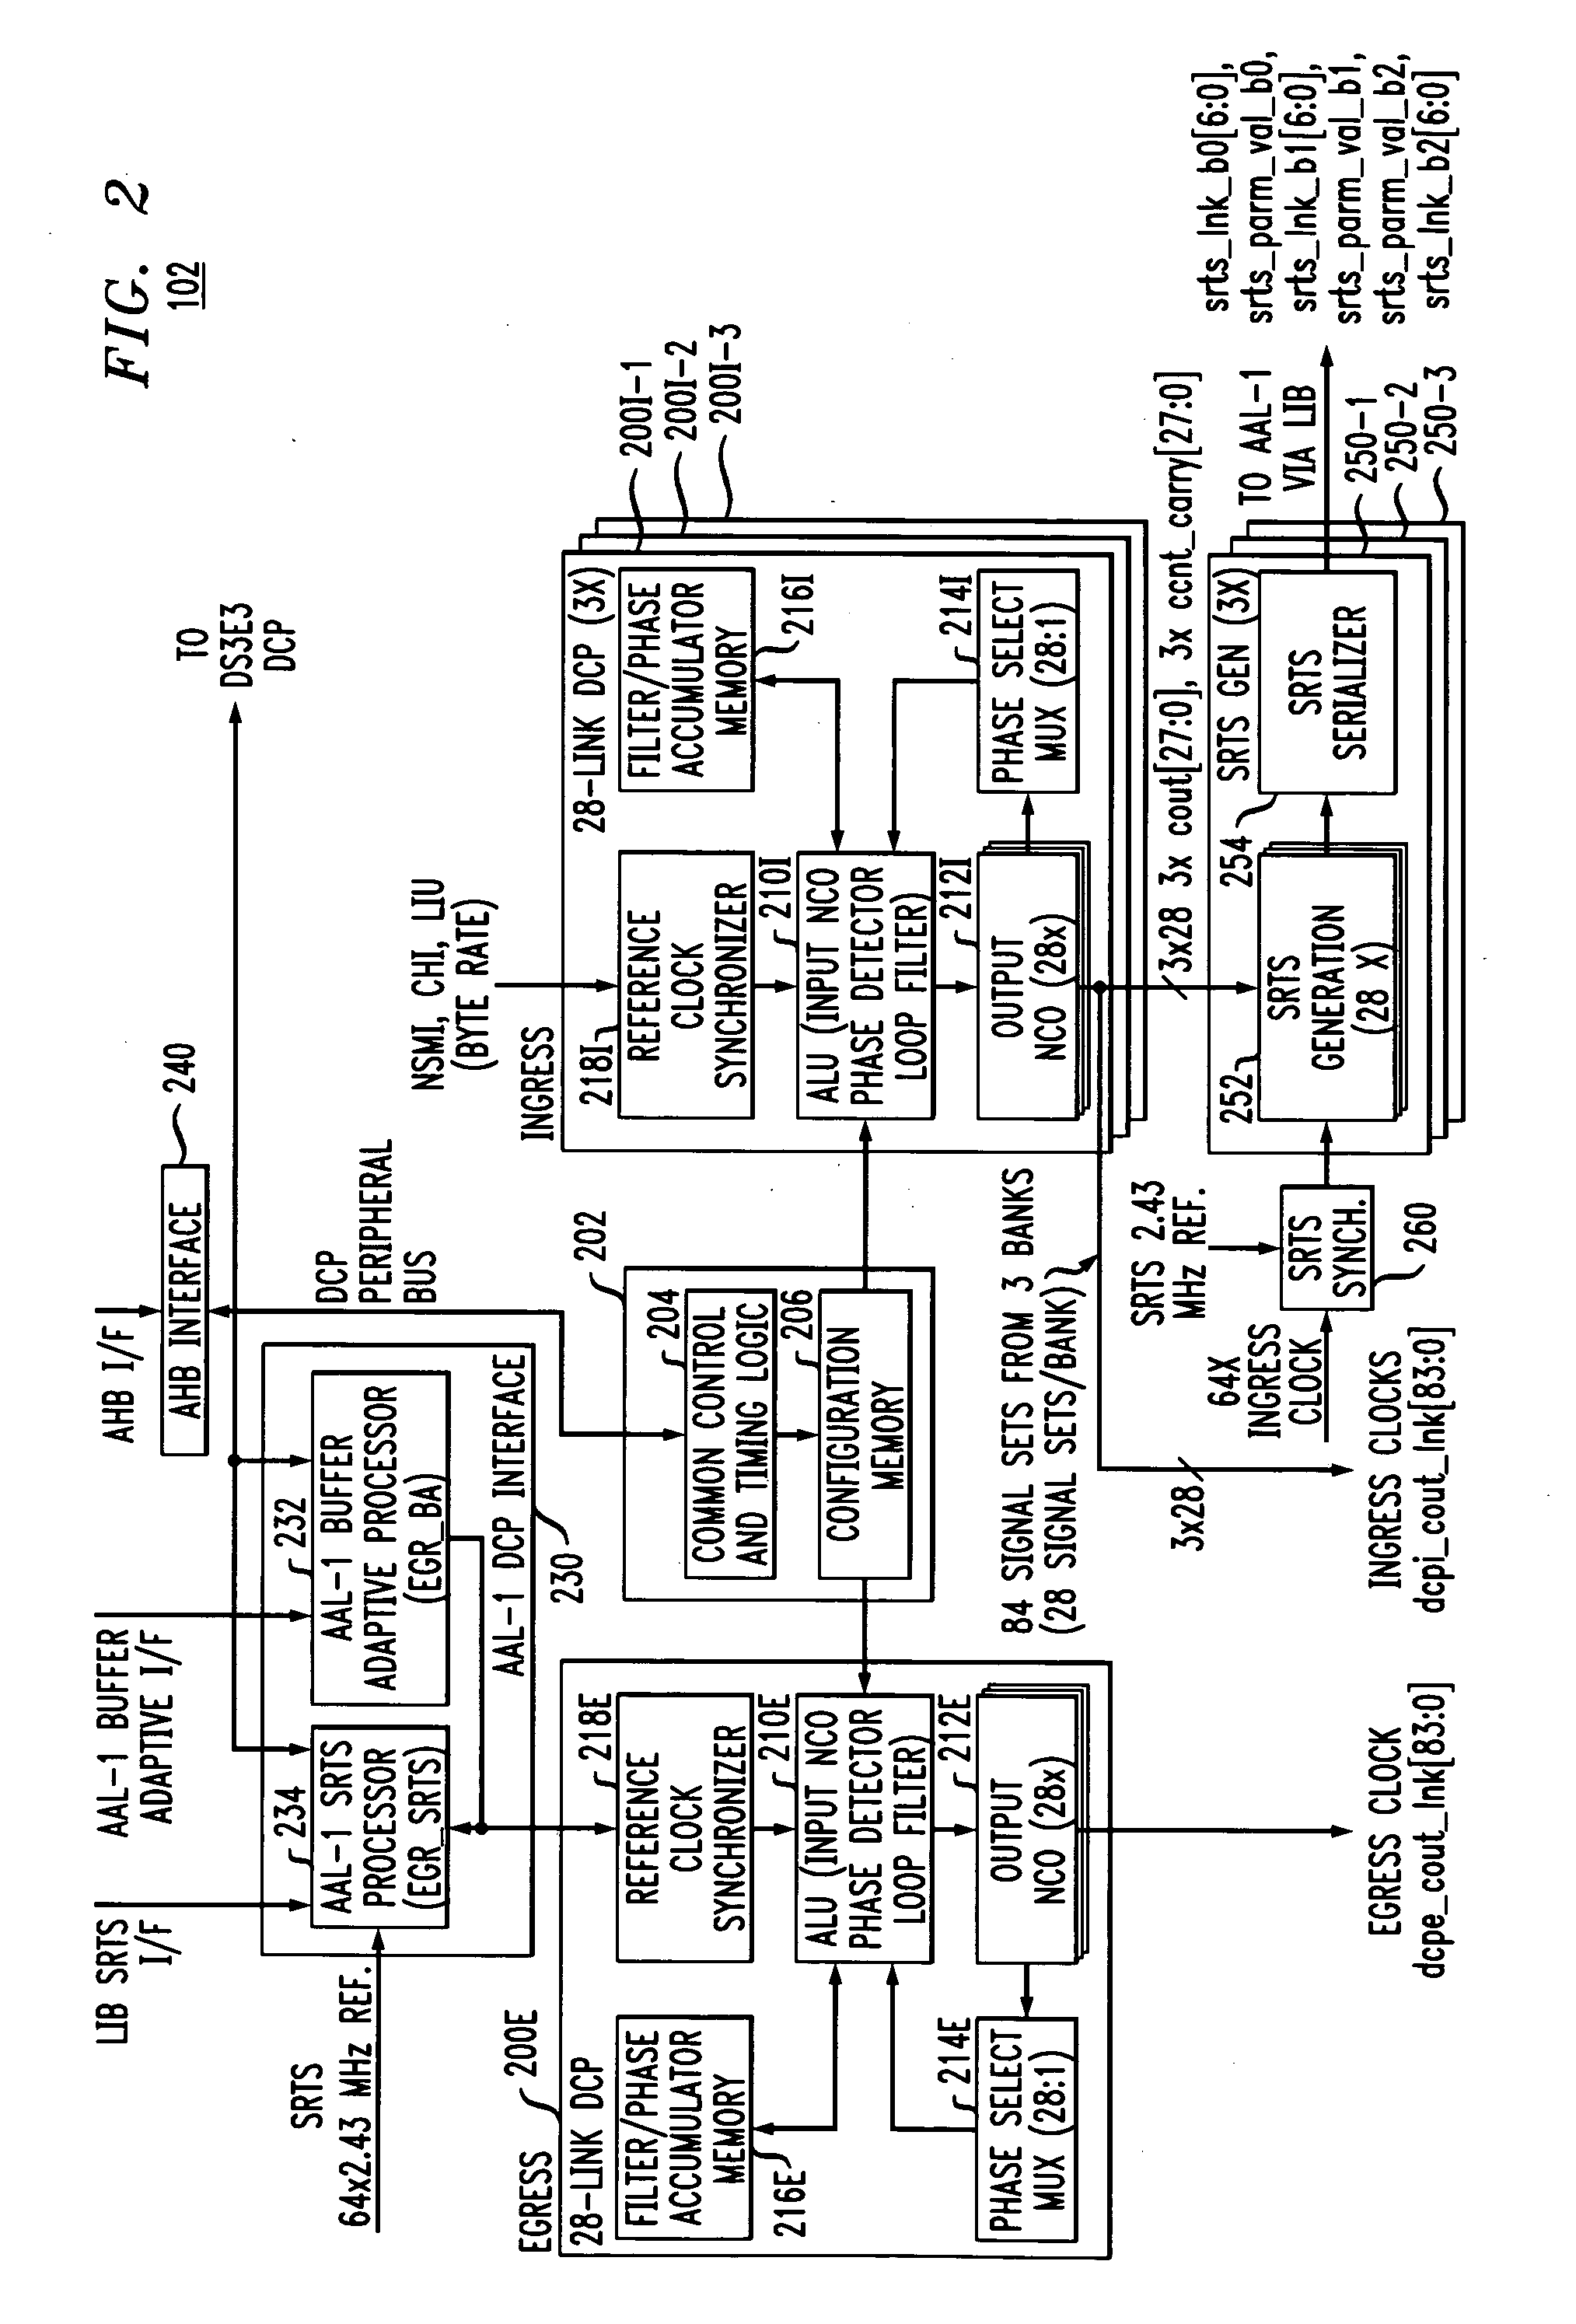 Link layer device with clock processing hardware resources shared among multiple ingress and egress links